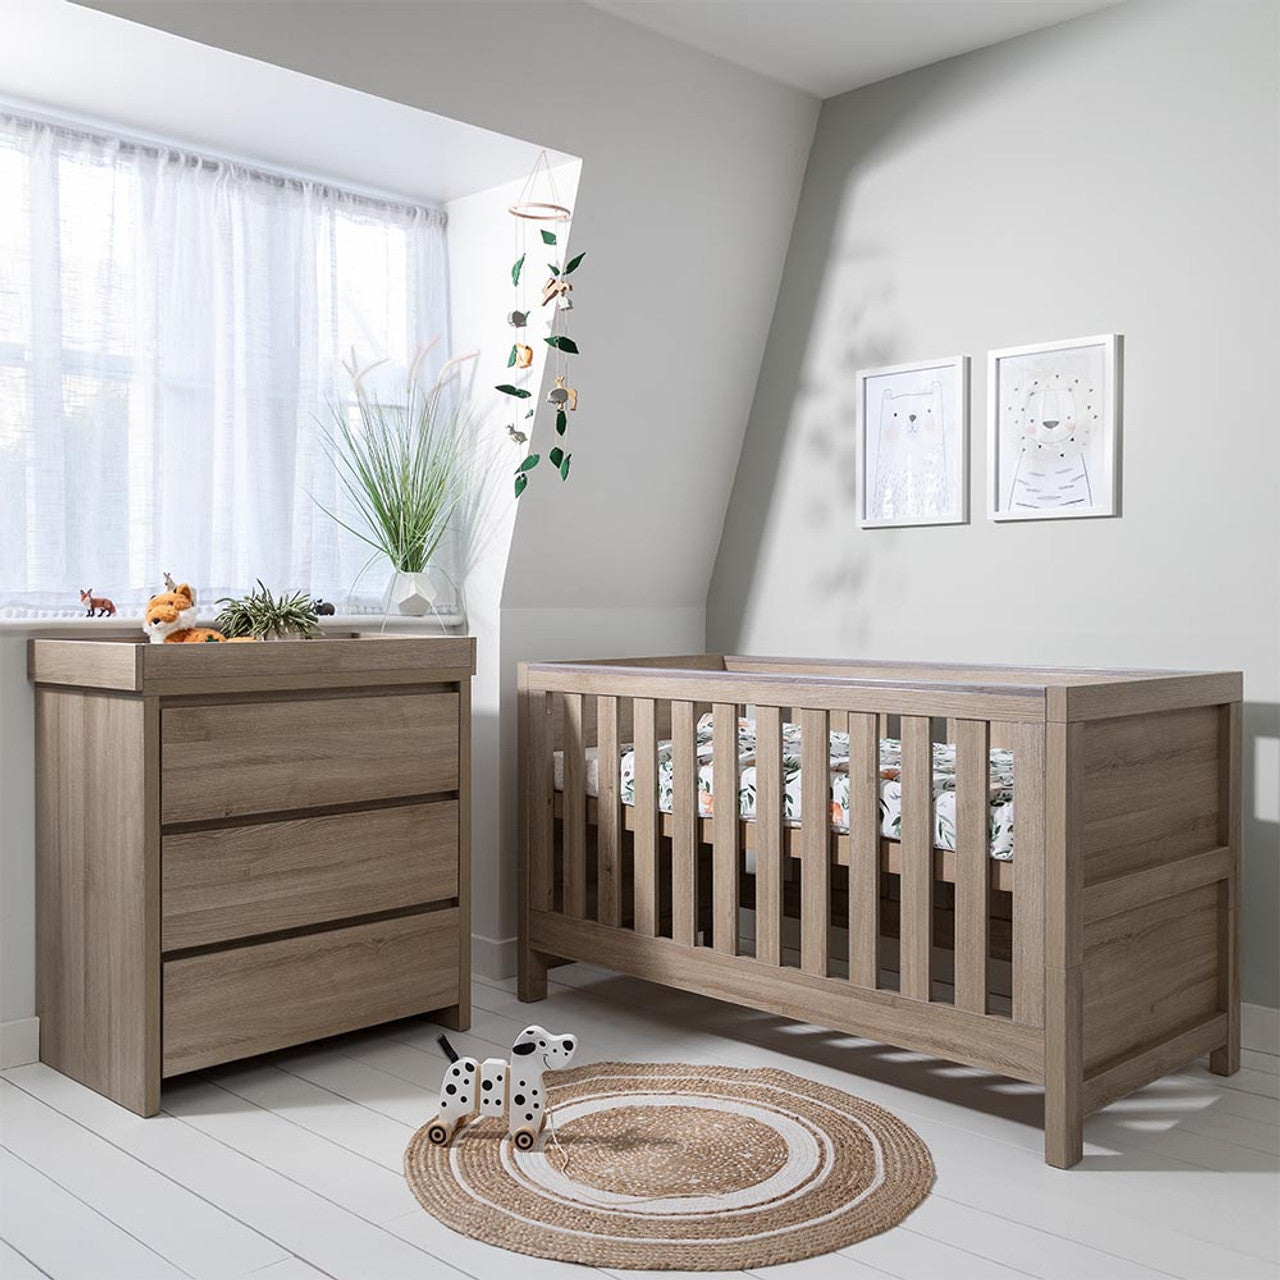 Tutti Bambini Modena 2 Piece Room Set - Oak - For Your Little One